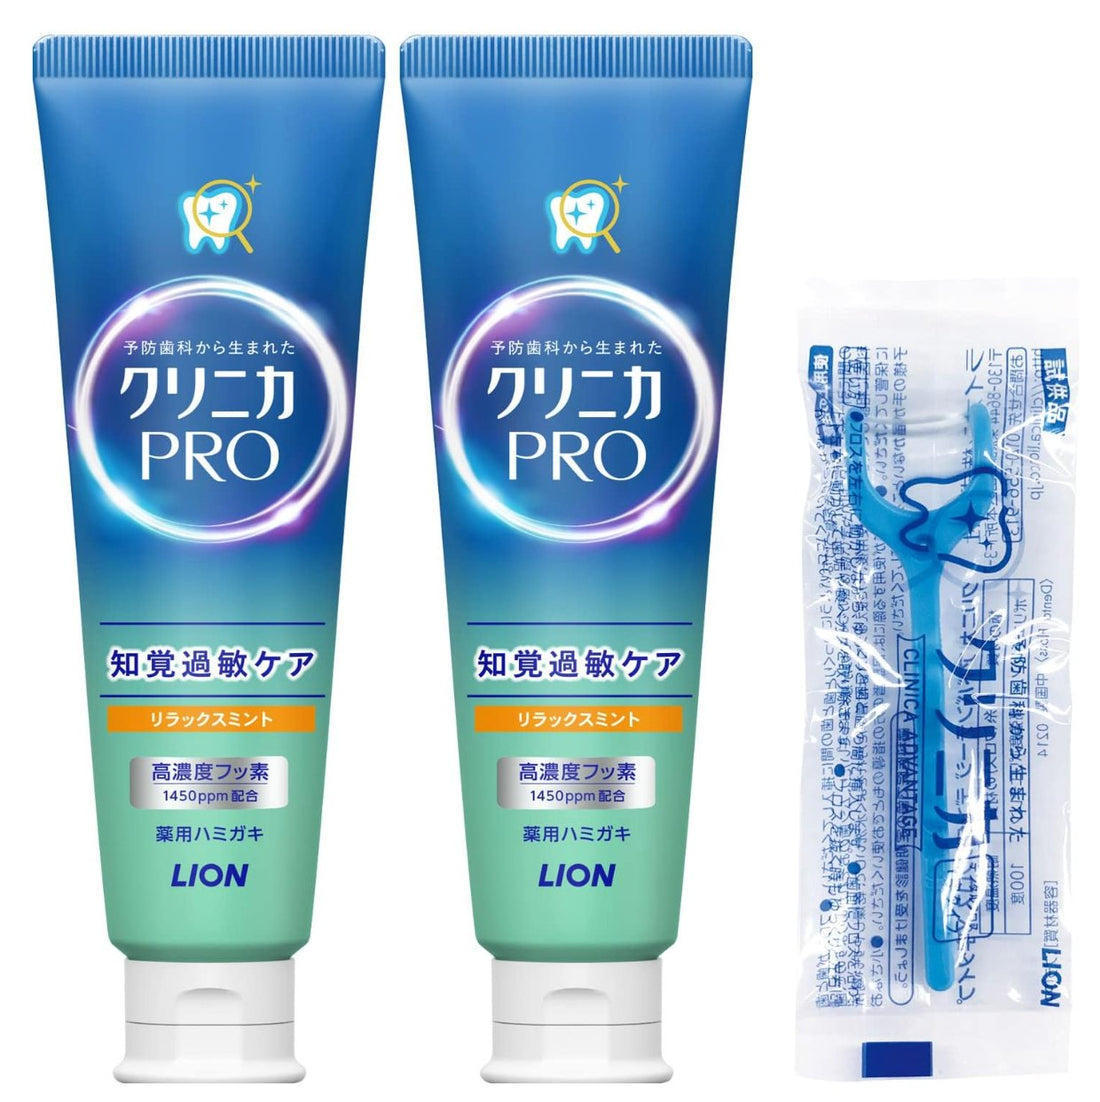 Clinica PRO [Quasi-drug] Hypersensitivity Care Toothpaste Relax Mint Toothpaste Fluorine 95g x 2 + Floss Included - NihonMura